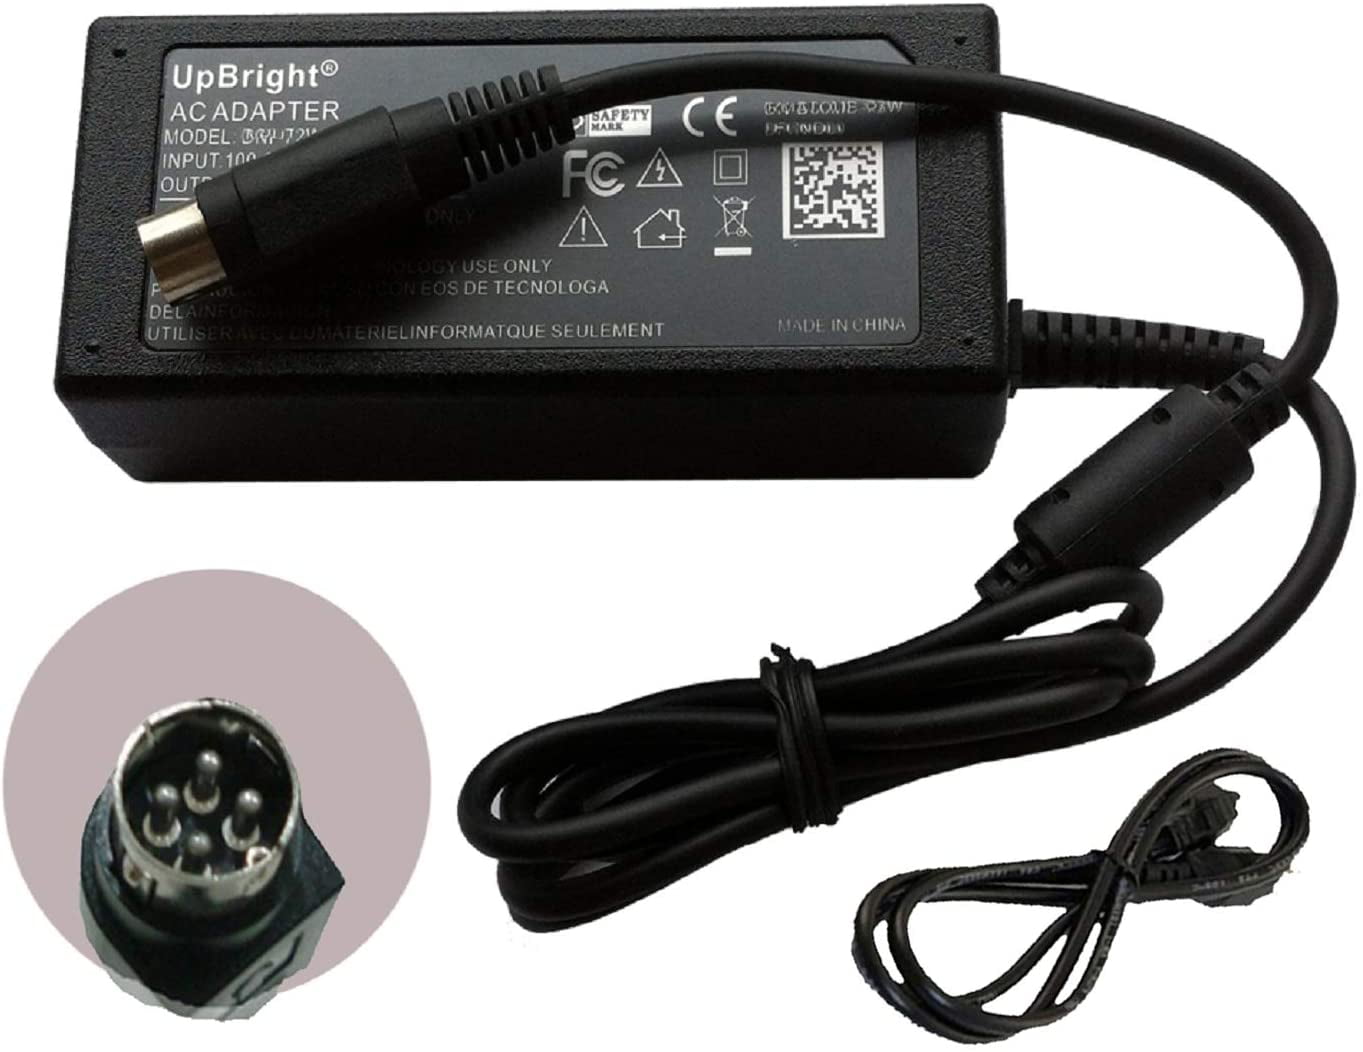 UpBright AC Adapter D155-84W Power Supply Cord Charger 